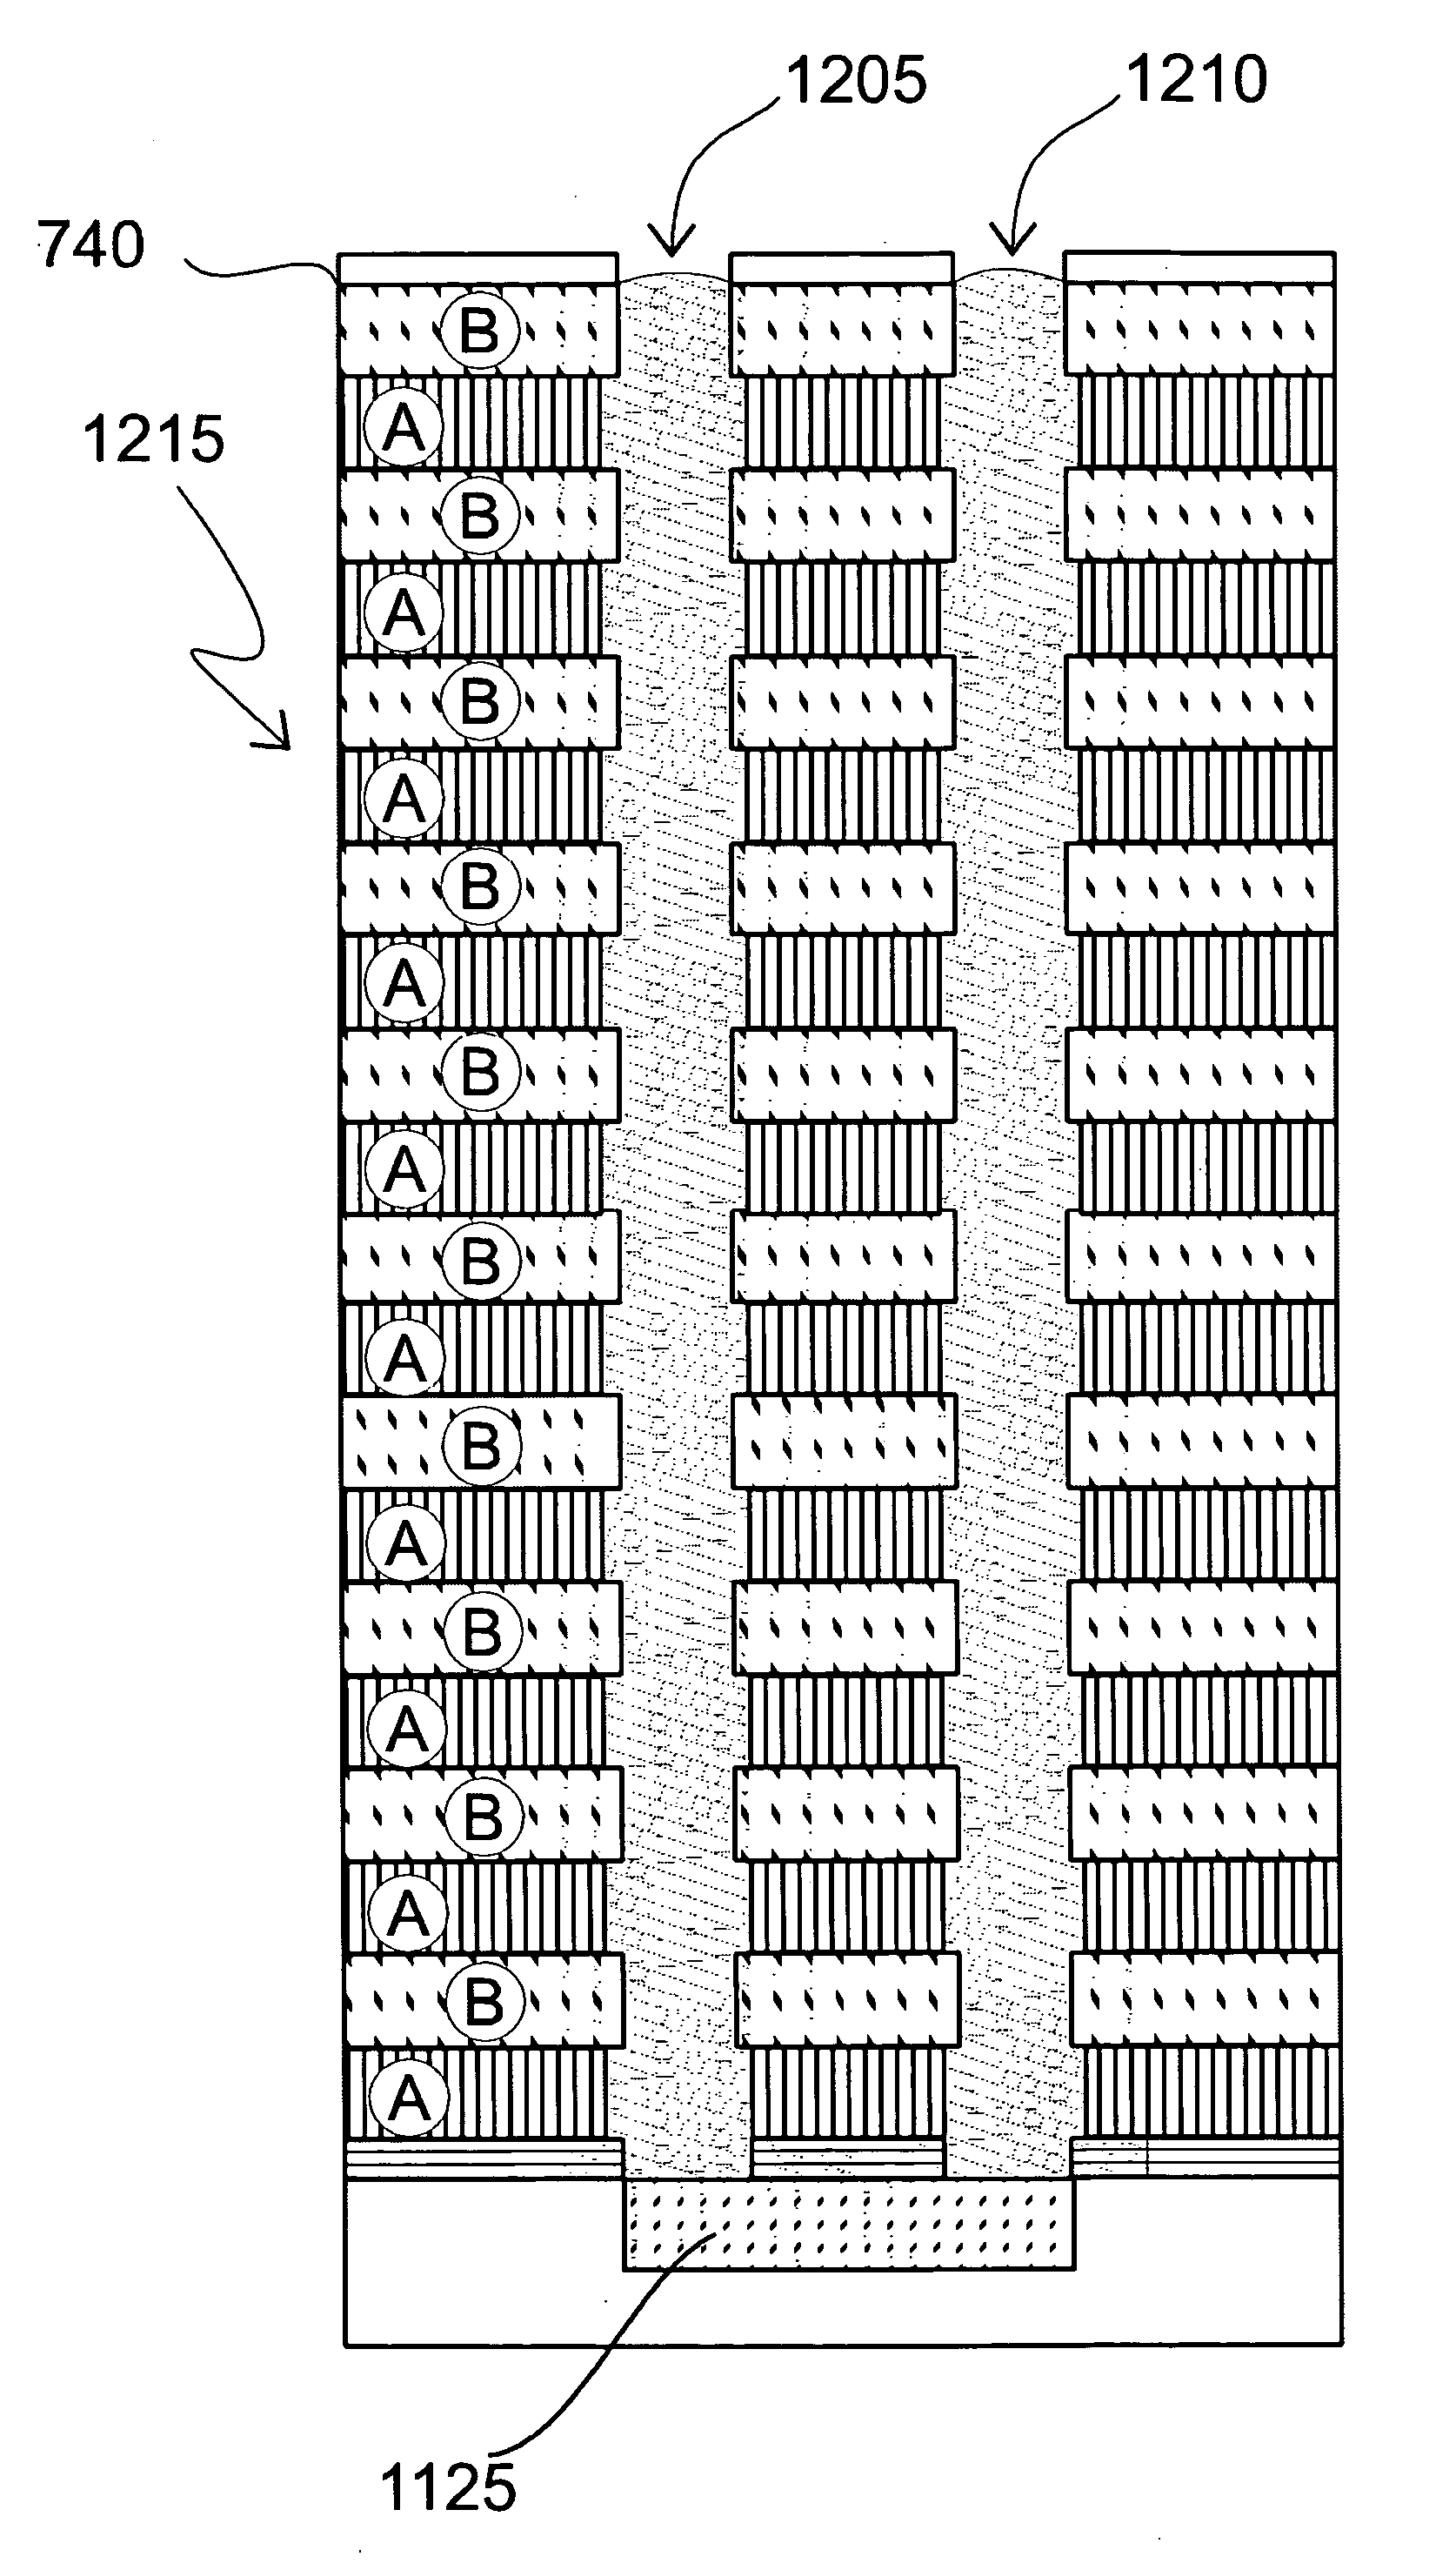 Method of fabricating data tracks for use in a magnetic shift register memory device